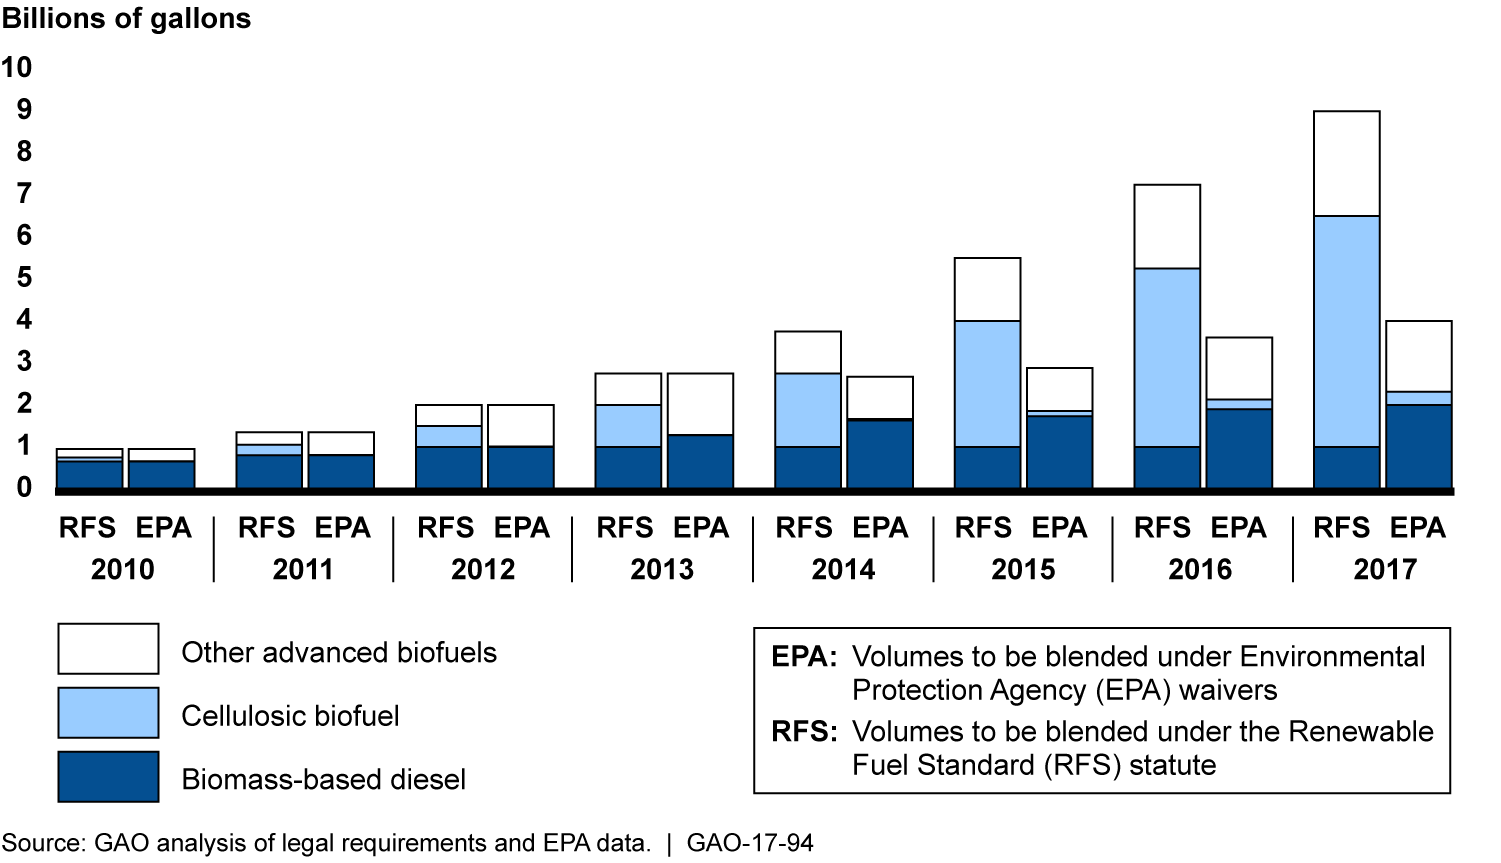 EPA significantly reduced RFS targets for advanced biofuels for 2014 through 2017